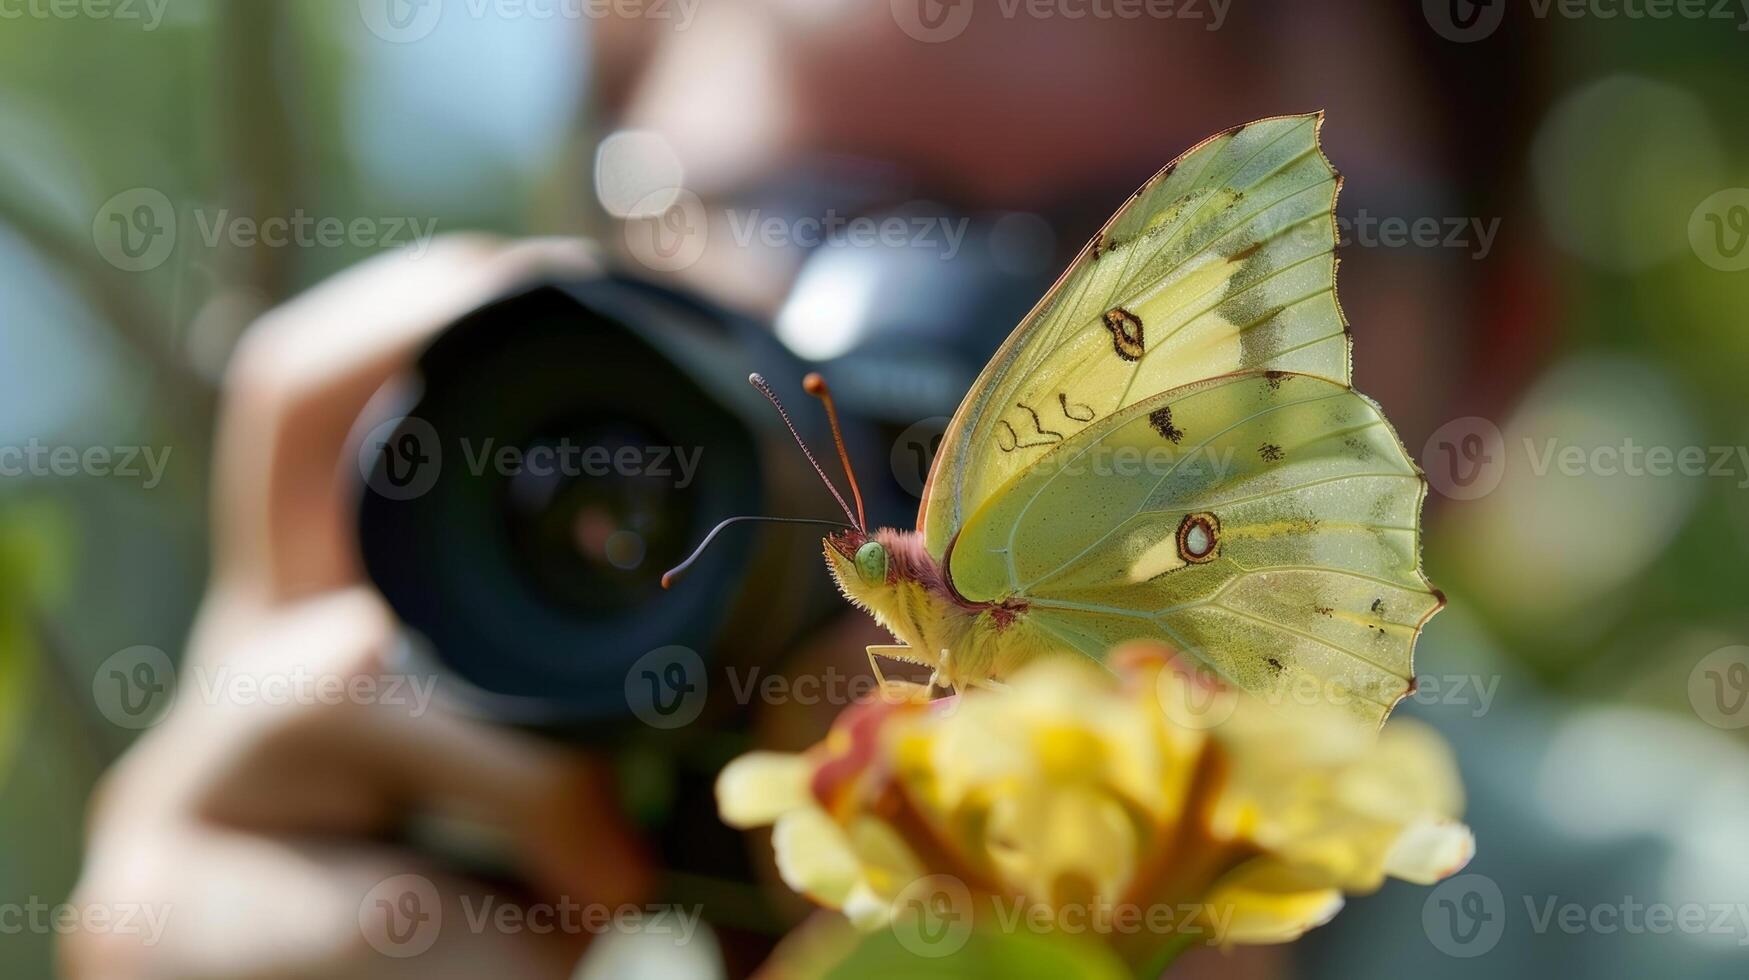 A man carefully focuses his camera on a delicate butterfly perched on a flower petal photo